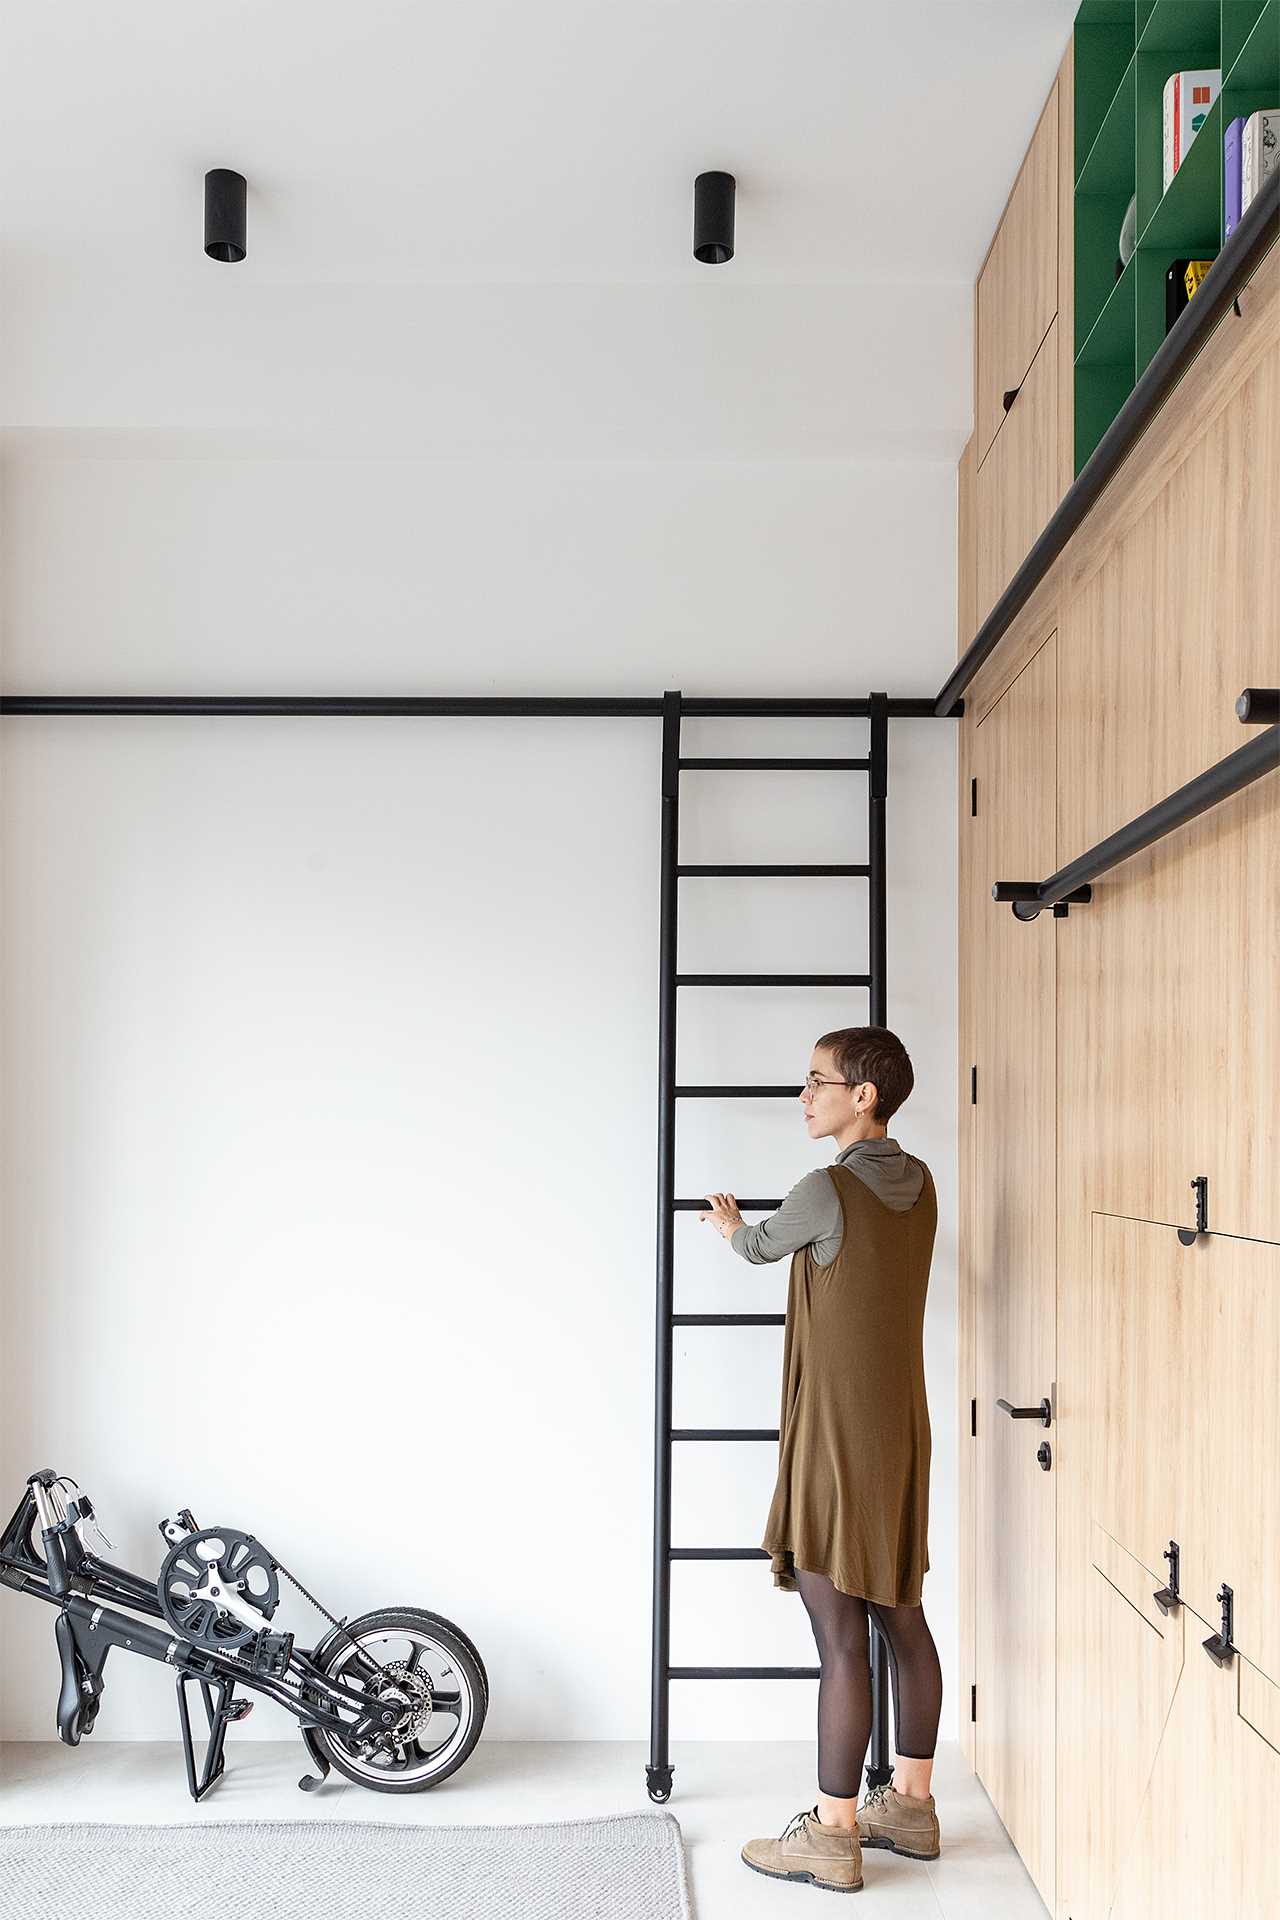 A studio apartment includes a black metal ladder that allows the apartment owner to easily access the upper storage cabinets.